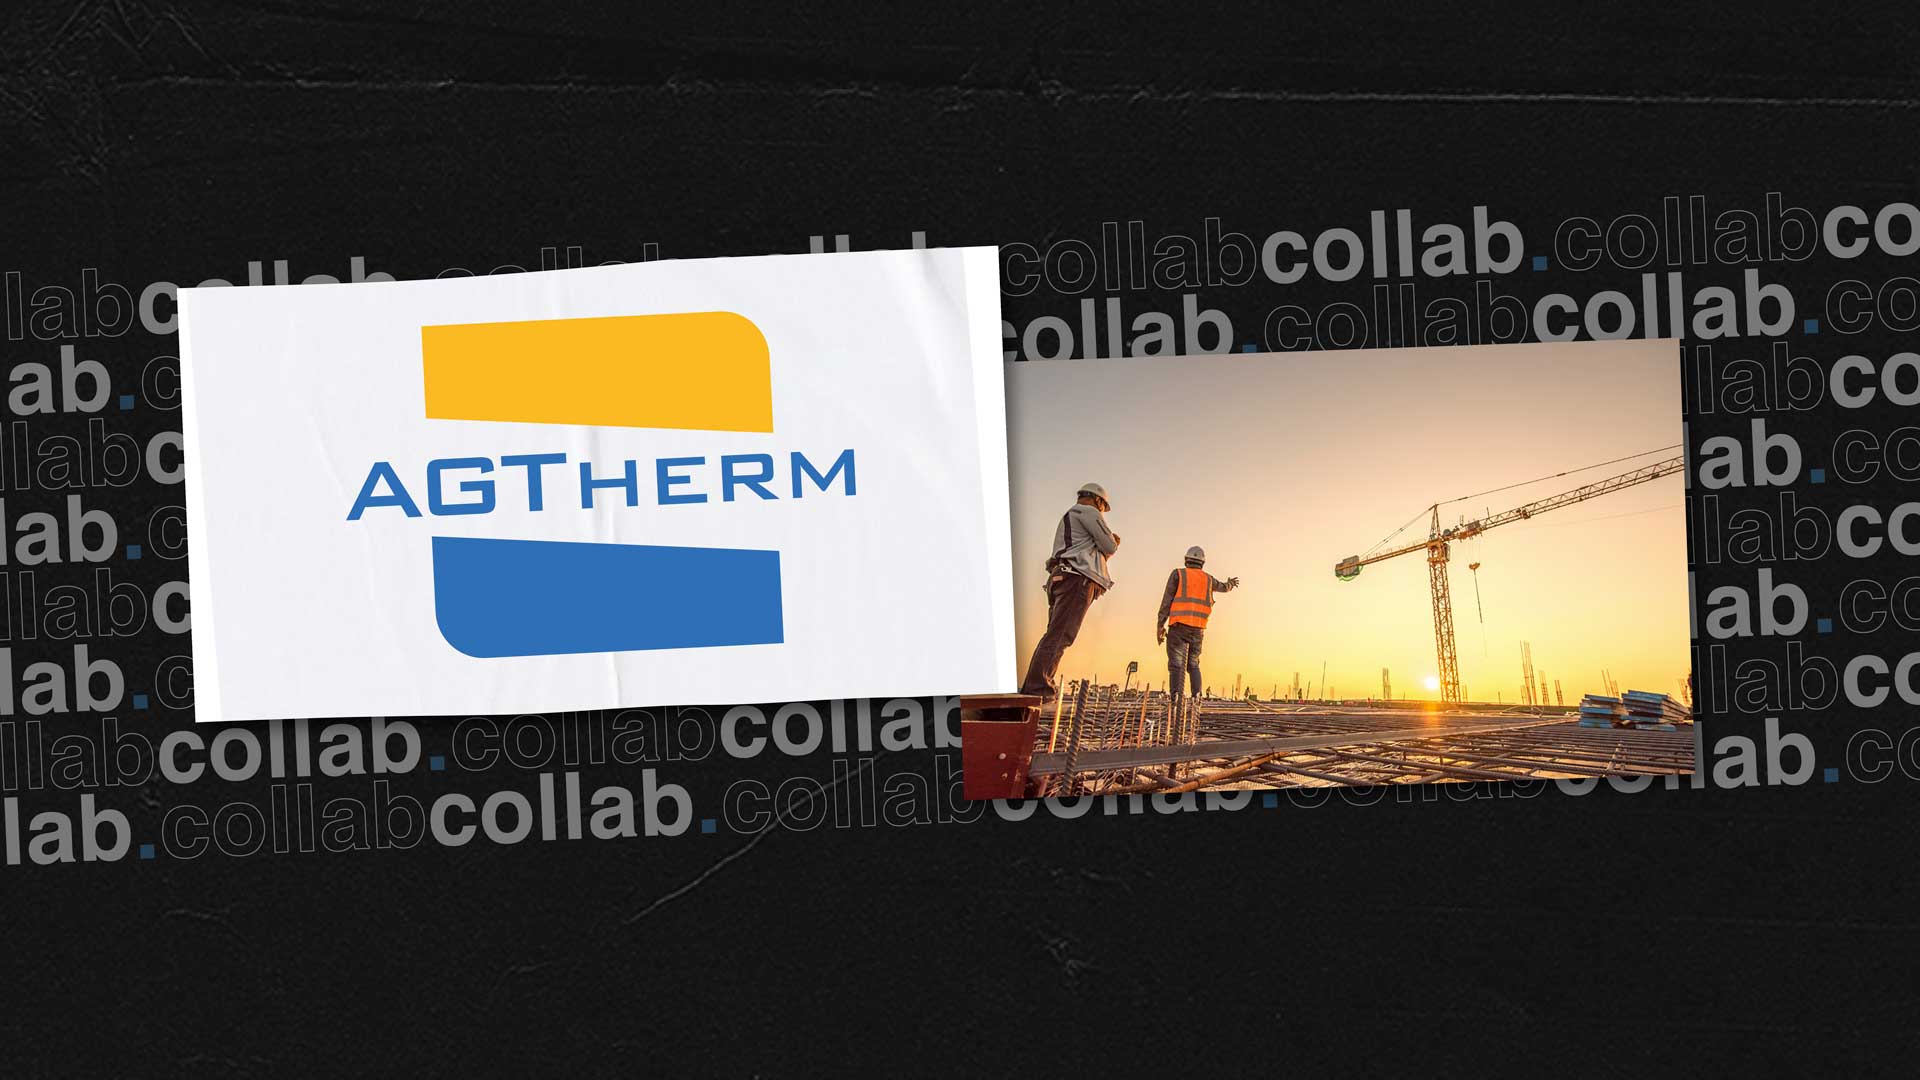 collaboration agtherm